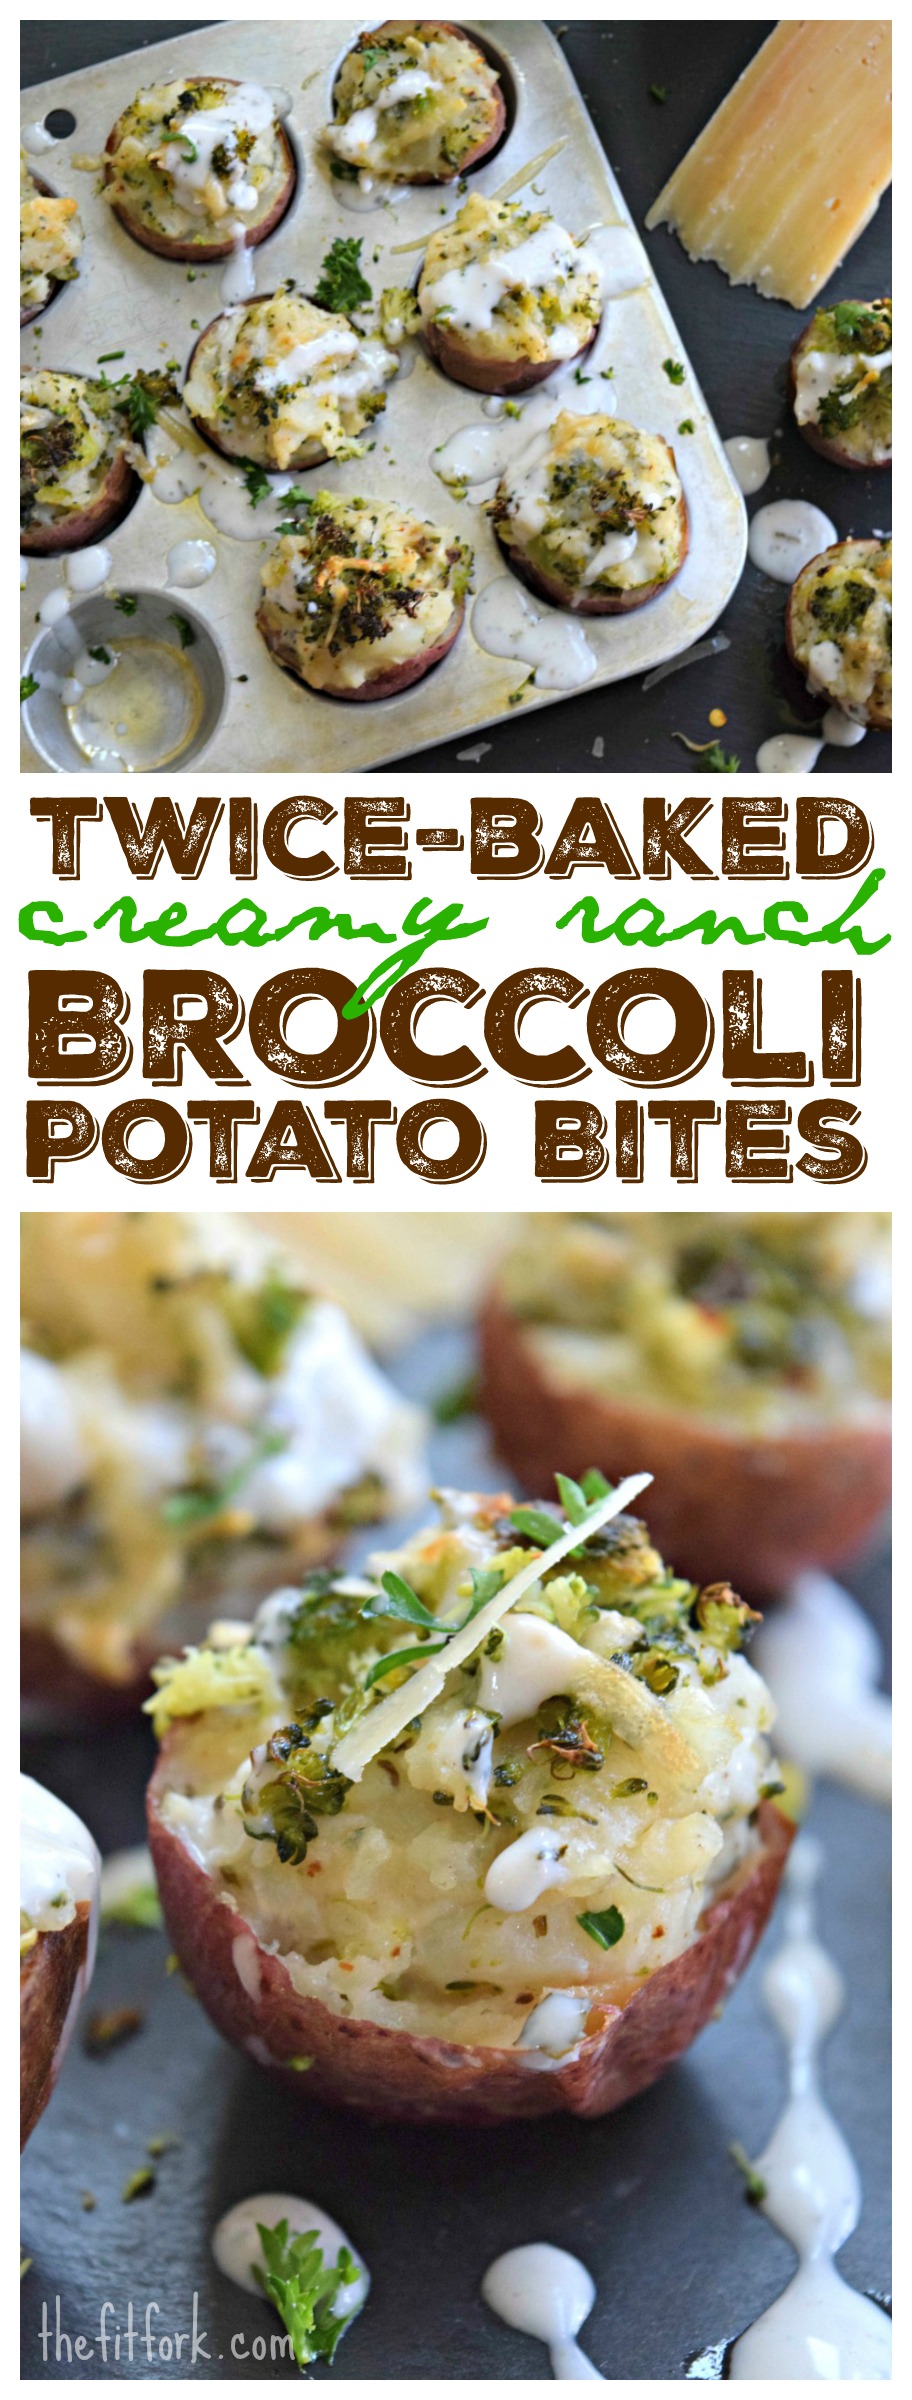 Twice Baked Creamy Ranch Broccoli Potato Bites make a yummy side dish (especially when you don't want a whole big baked potato) or easy party appetizer.